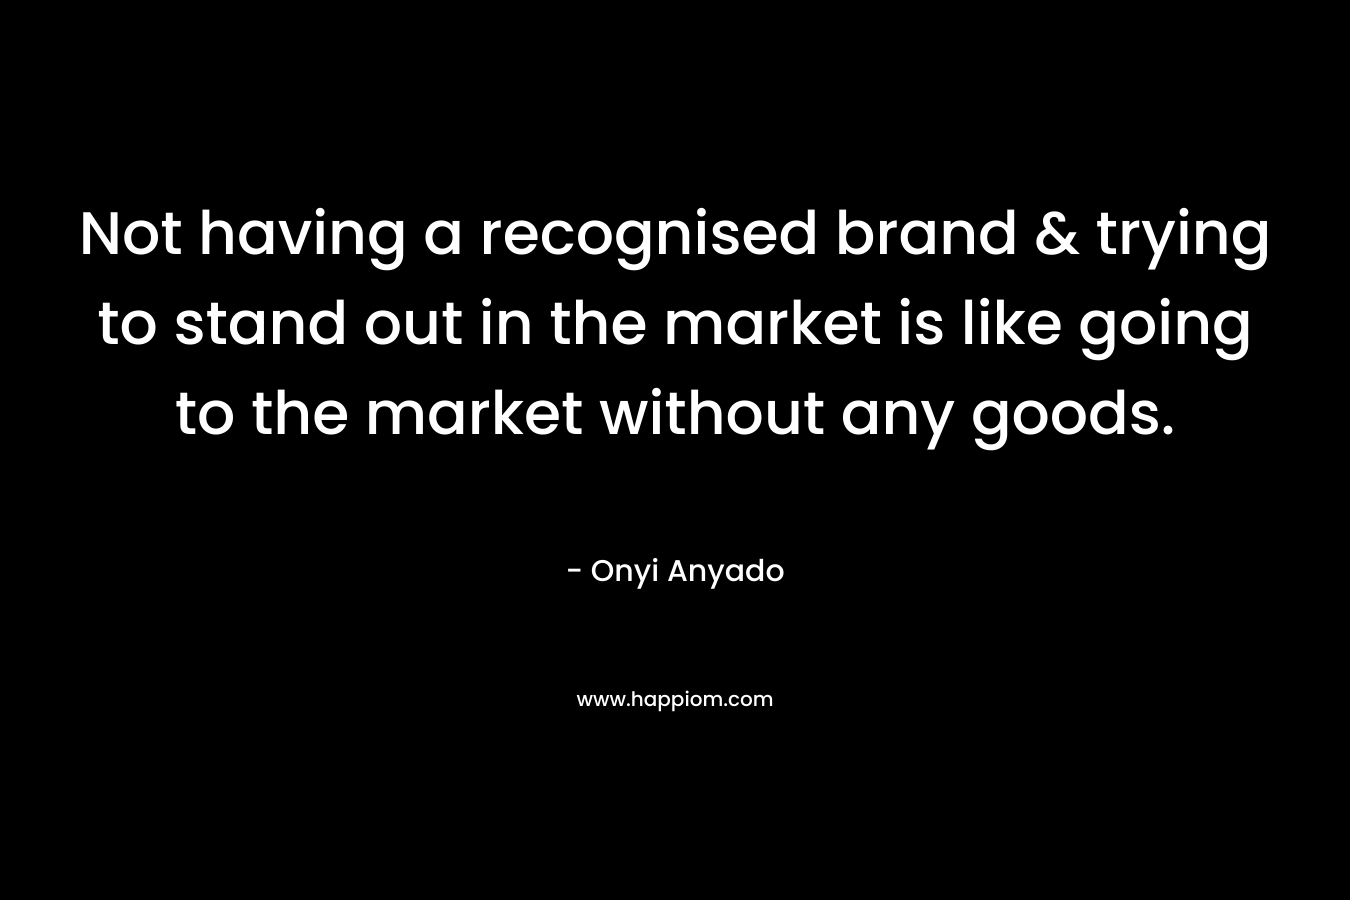 Not having a recognised brand & trying to stand out in the market is like going to the market without any goods. – Onyi Anyado